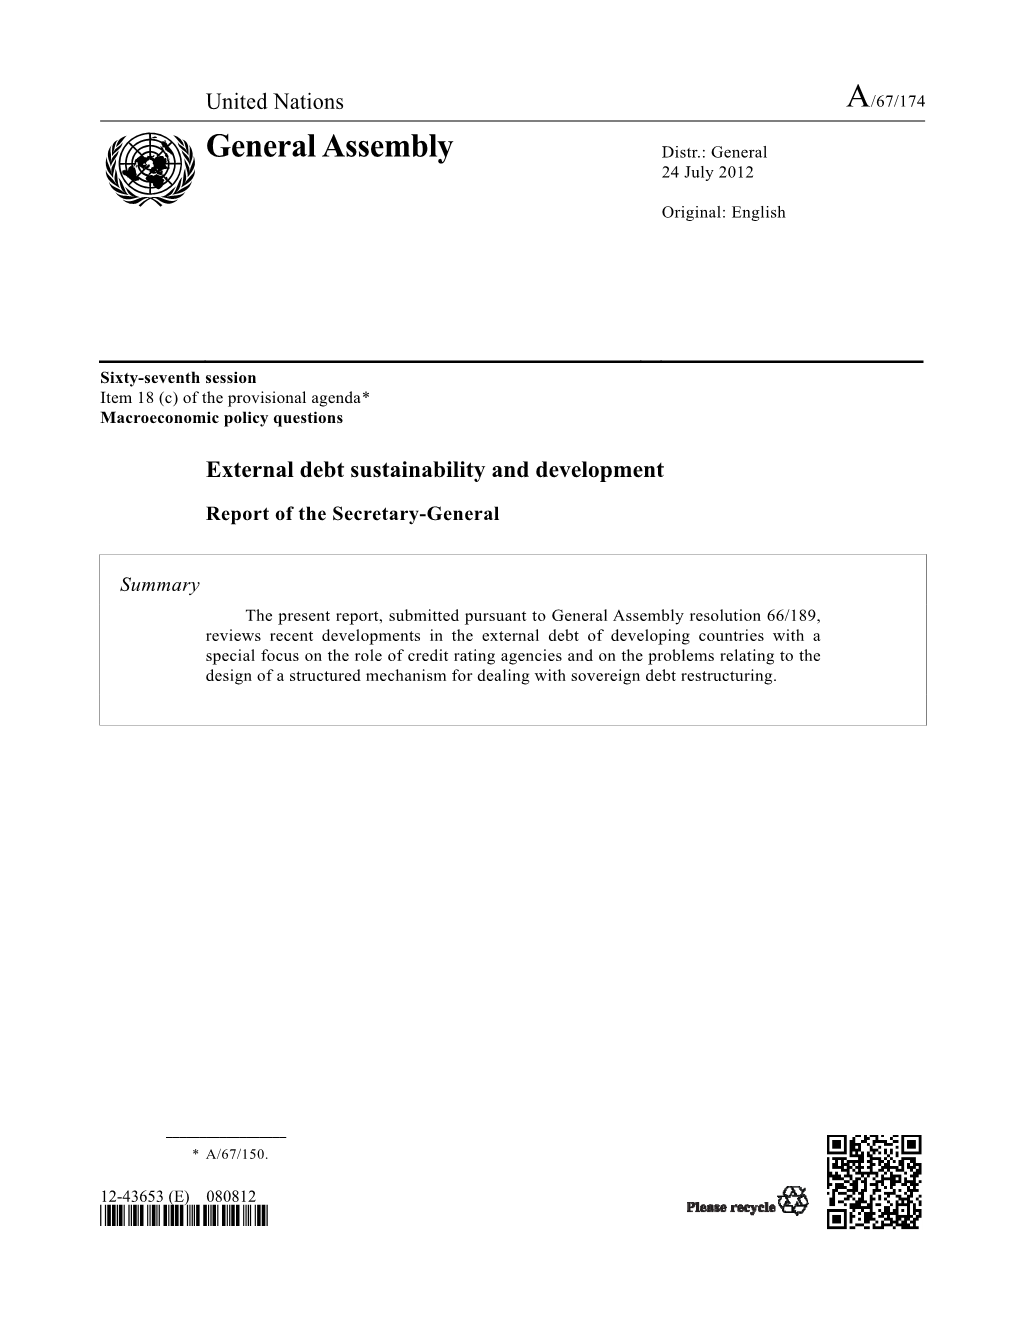 External Debt Sustainability and Development Report of The